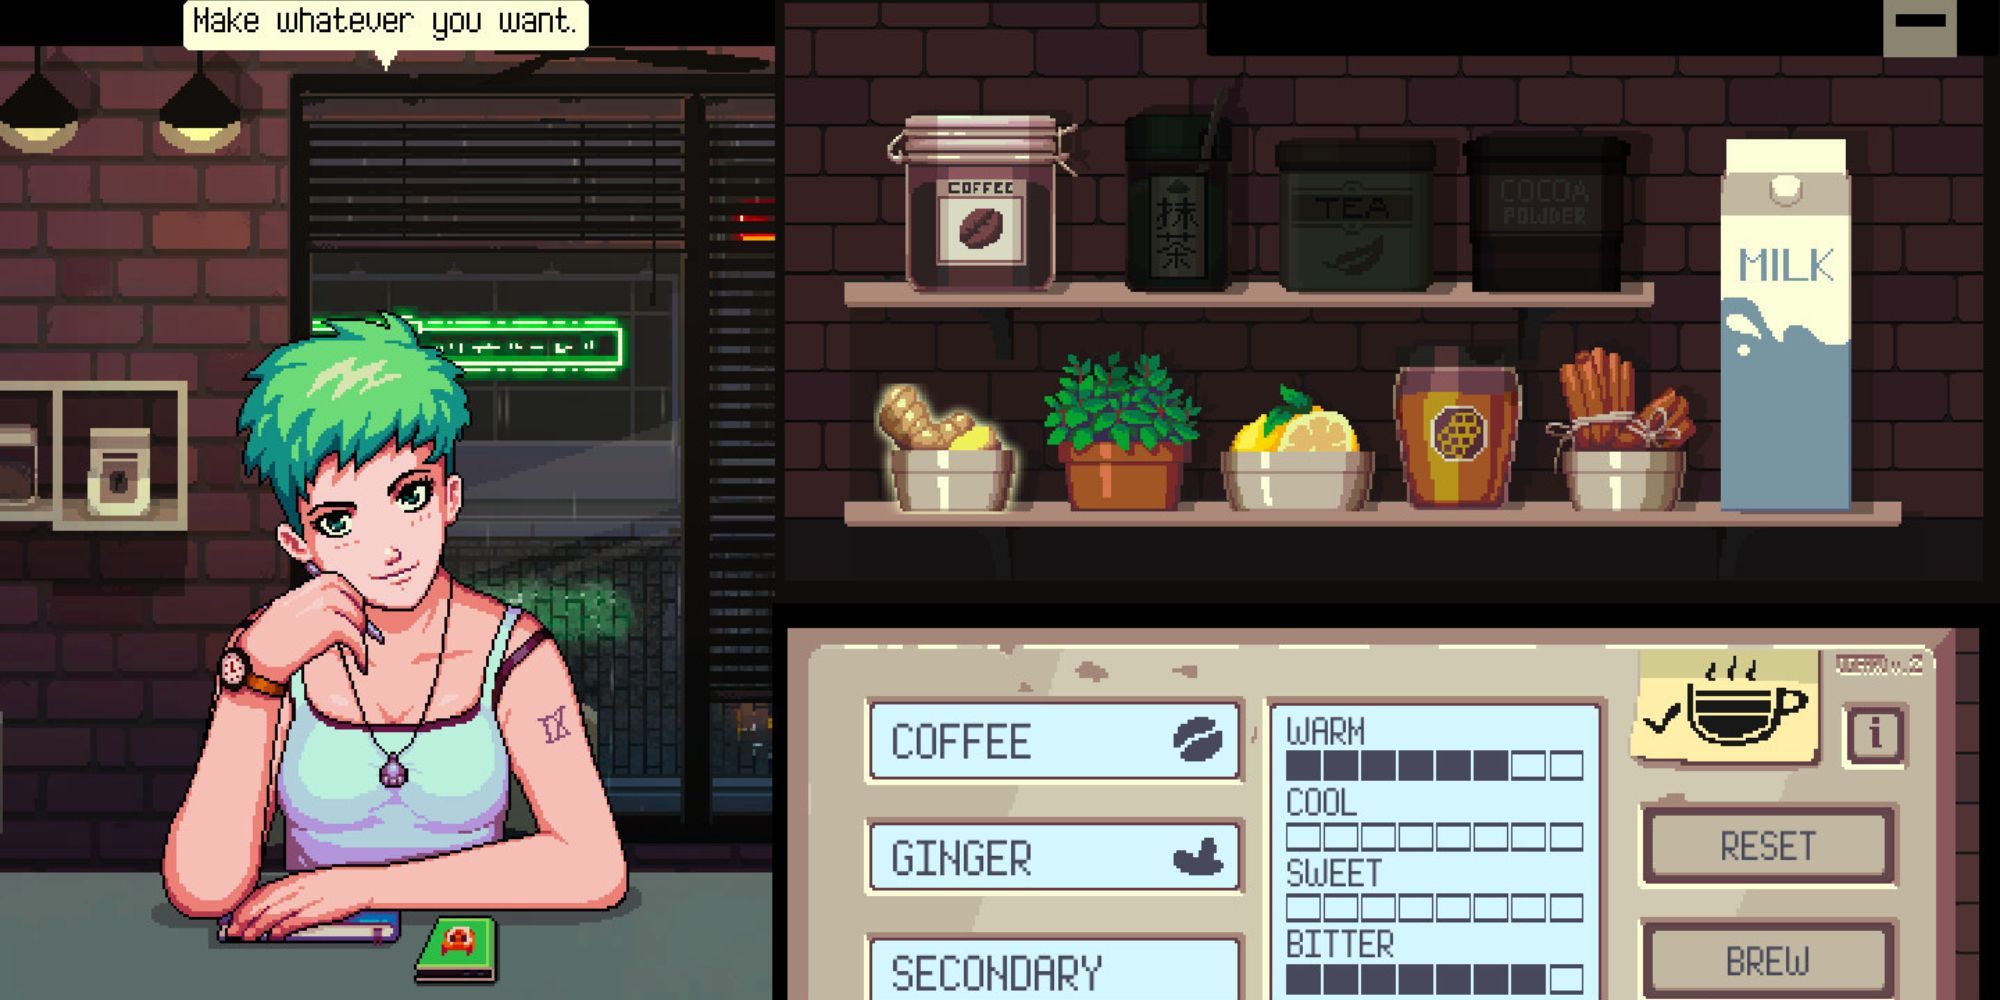 A customer telling the player to make whatever they want in Coffee Talk